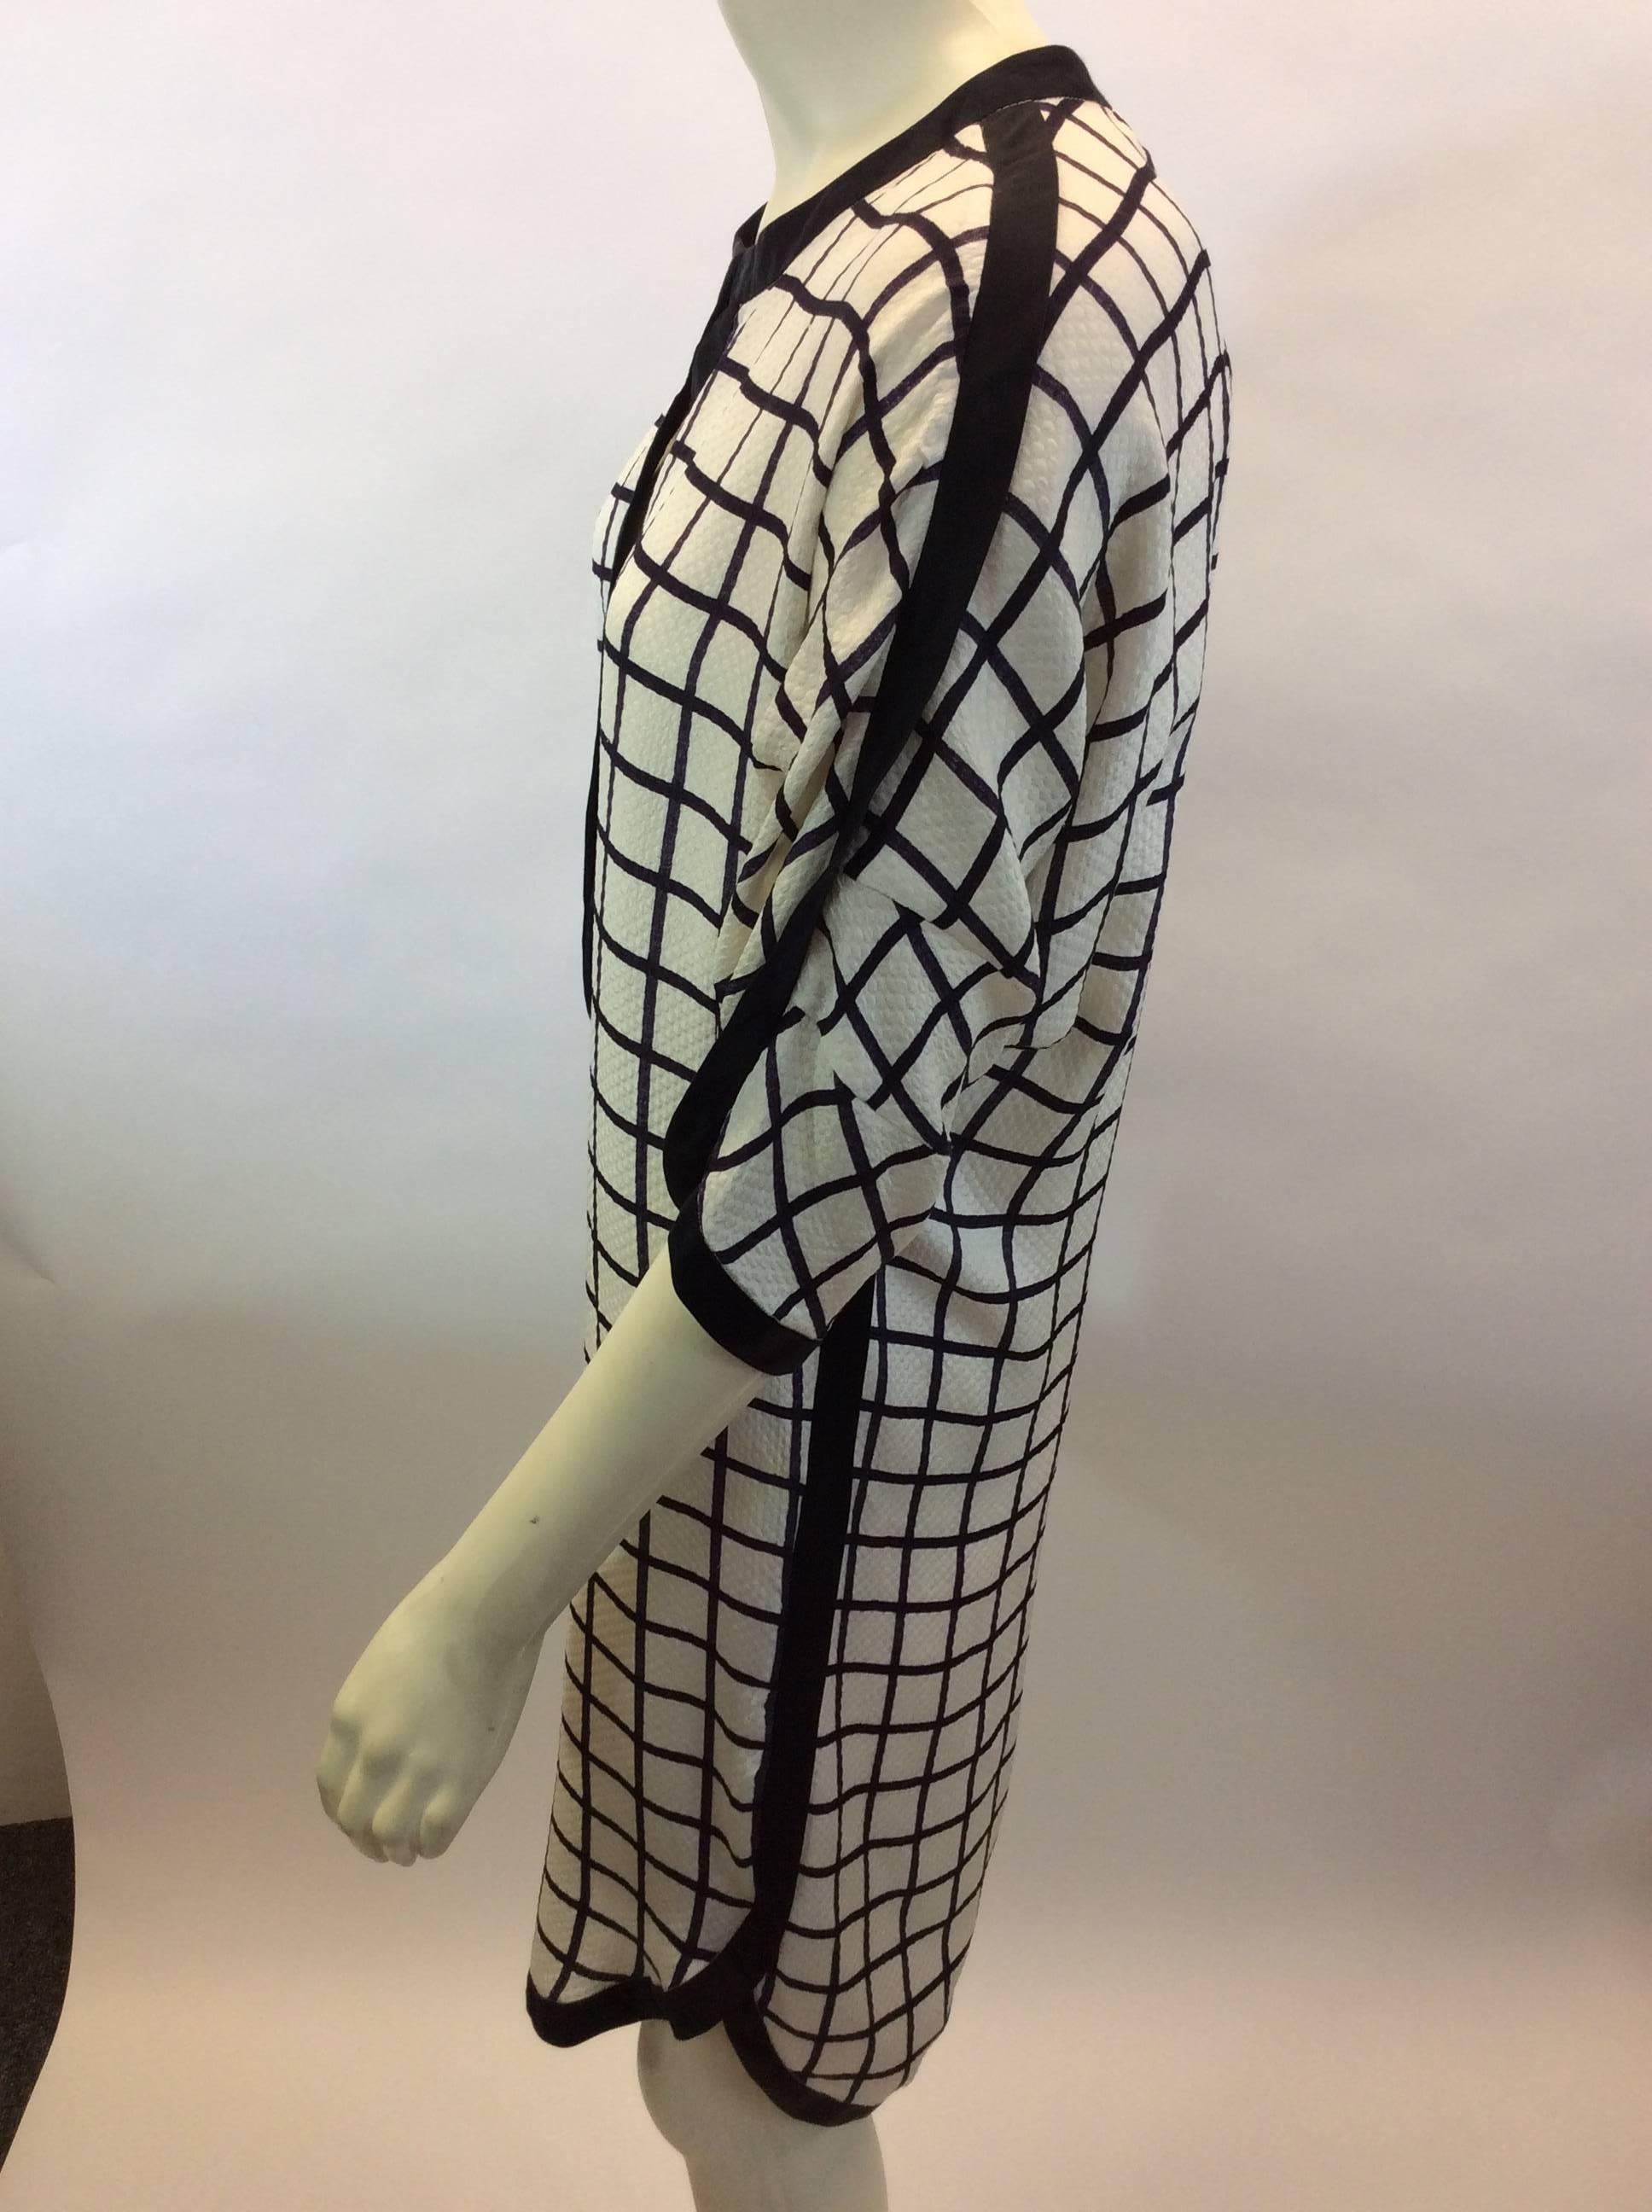 Isabel Marant White and Black Windowpane Dress
$199
Made in India
60% Cotton
40% Silk
Trim-100% Silk
Size 34
Length 35.5